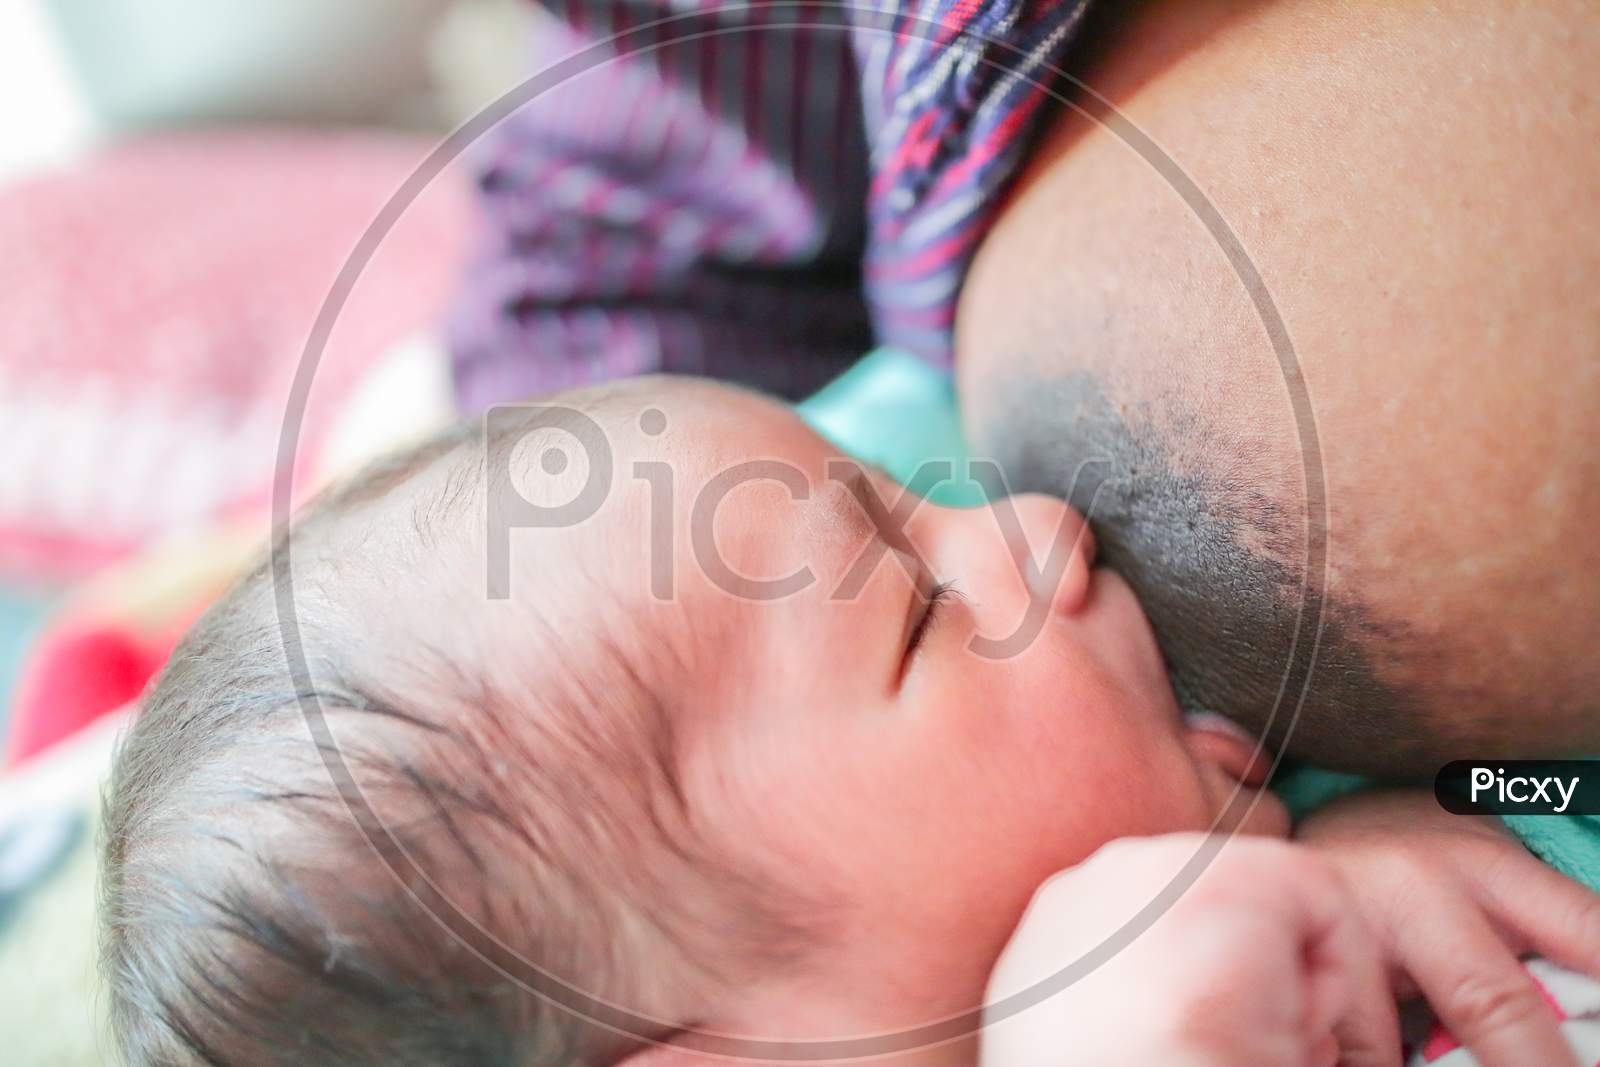 A Baby Breastfeeding From Mother'S Nipple With Eyes Closed. Exclusive Breast Feeding Concept Image